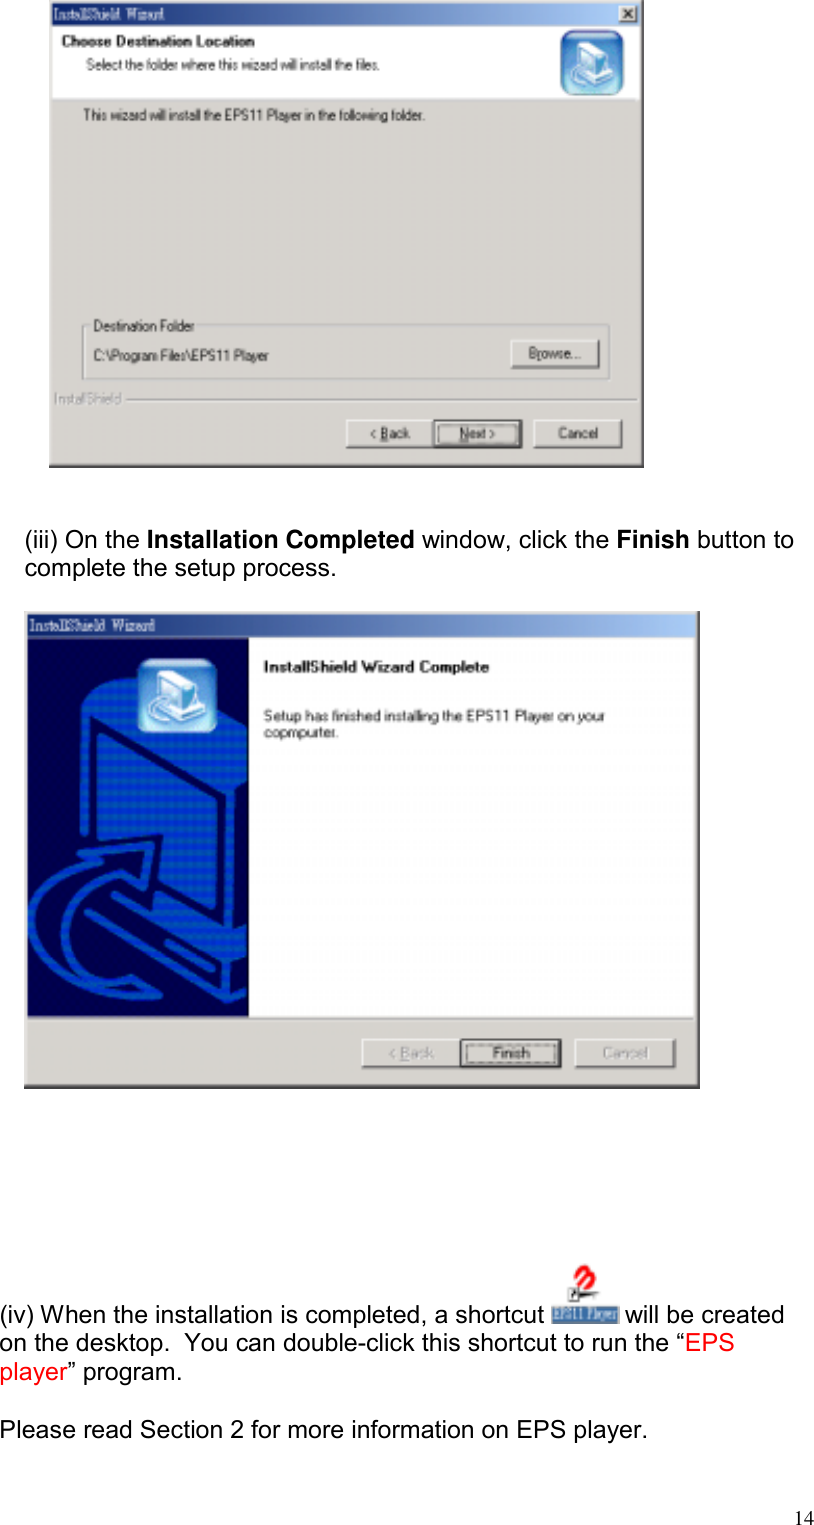    (iii) On the Installation Completed window, click the Finish button to complete the setup process.         (iv) When the installation is completed, a shortcut   will be created on the desktop.  You can double-click this shortcut to run the “EPS player” program.    Please read Section 2 for more information on EPS player.  14